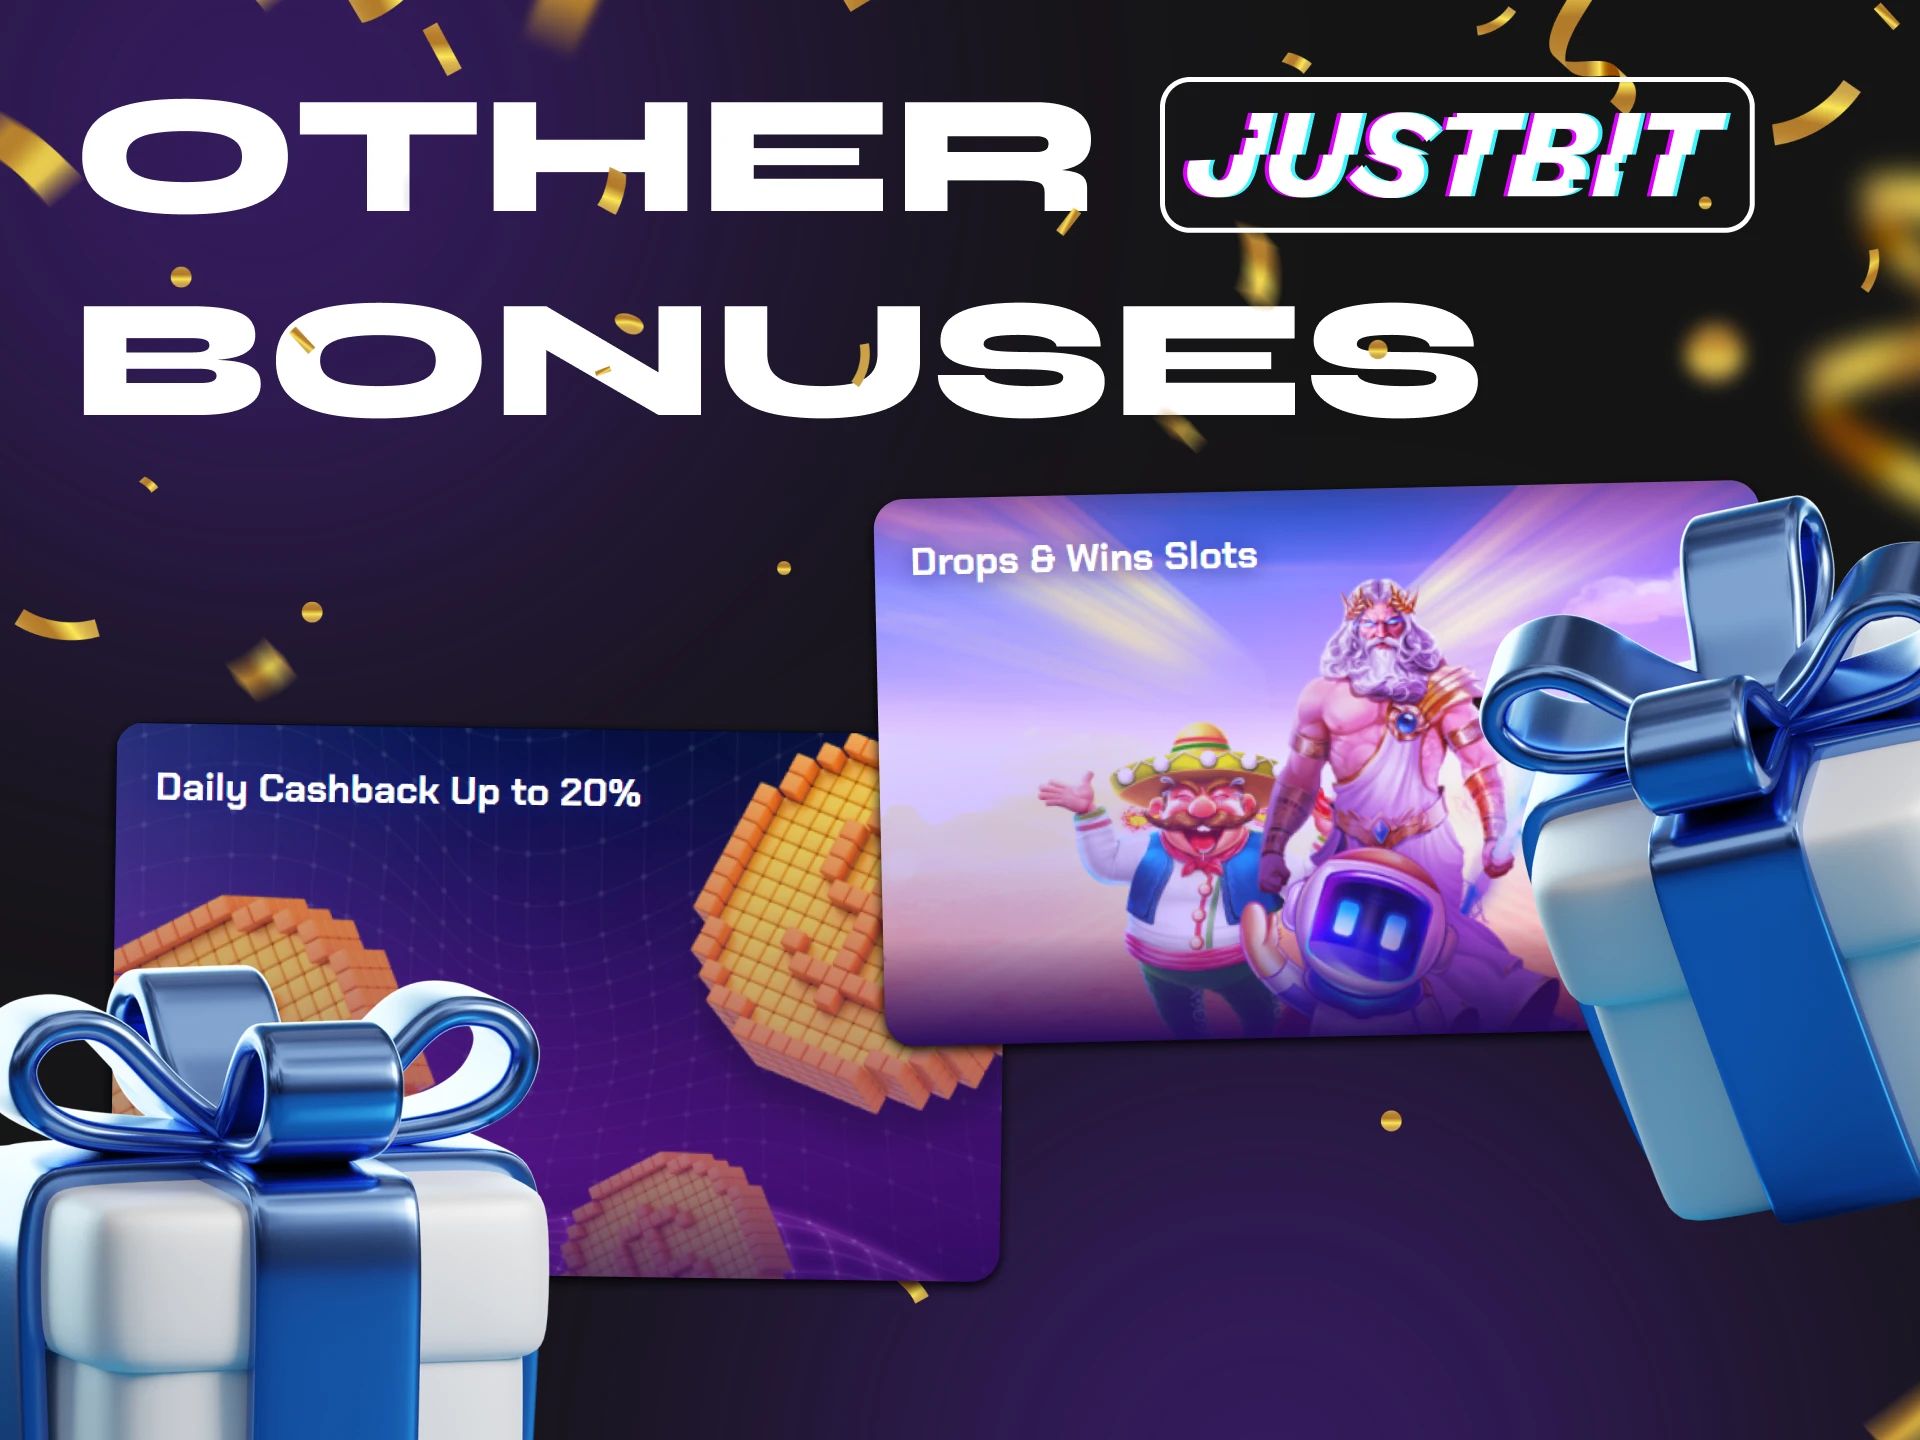 Justbit Casino offers many bonuses to suit every taste.